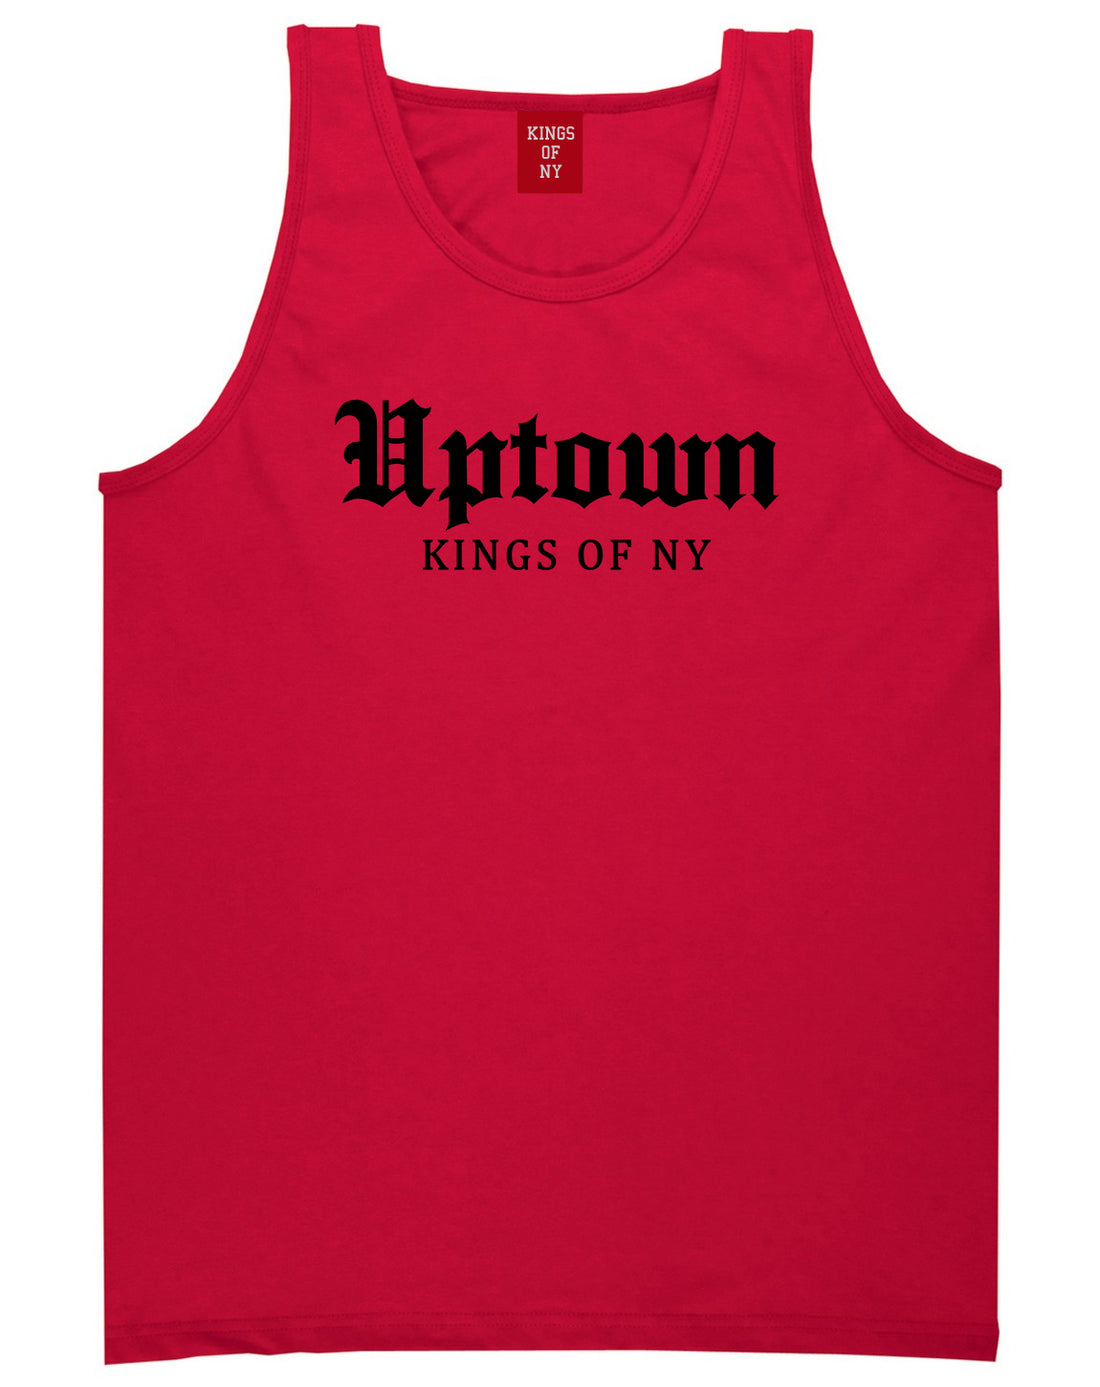 Uptown Old English Mens Tank Top Shirt Red by Kings Of NY